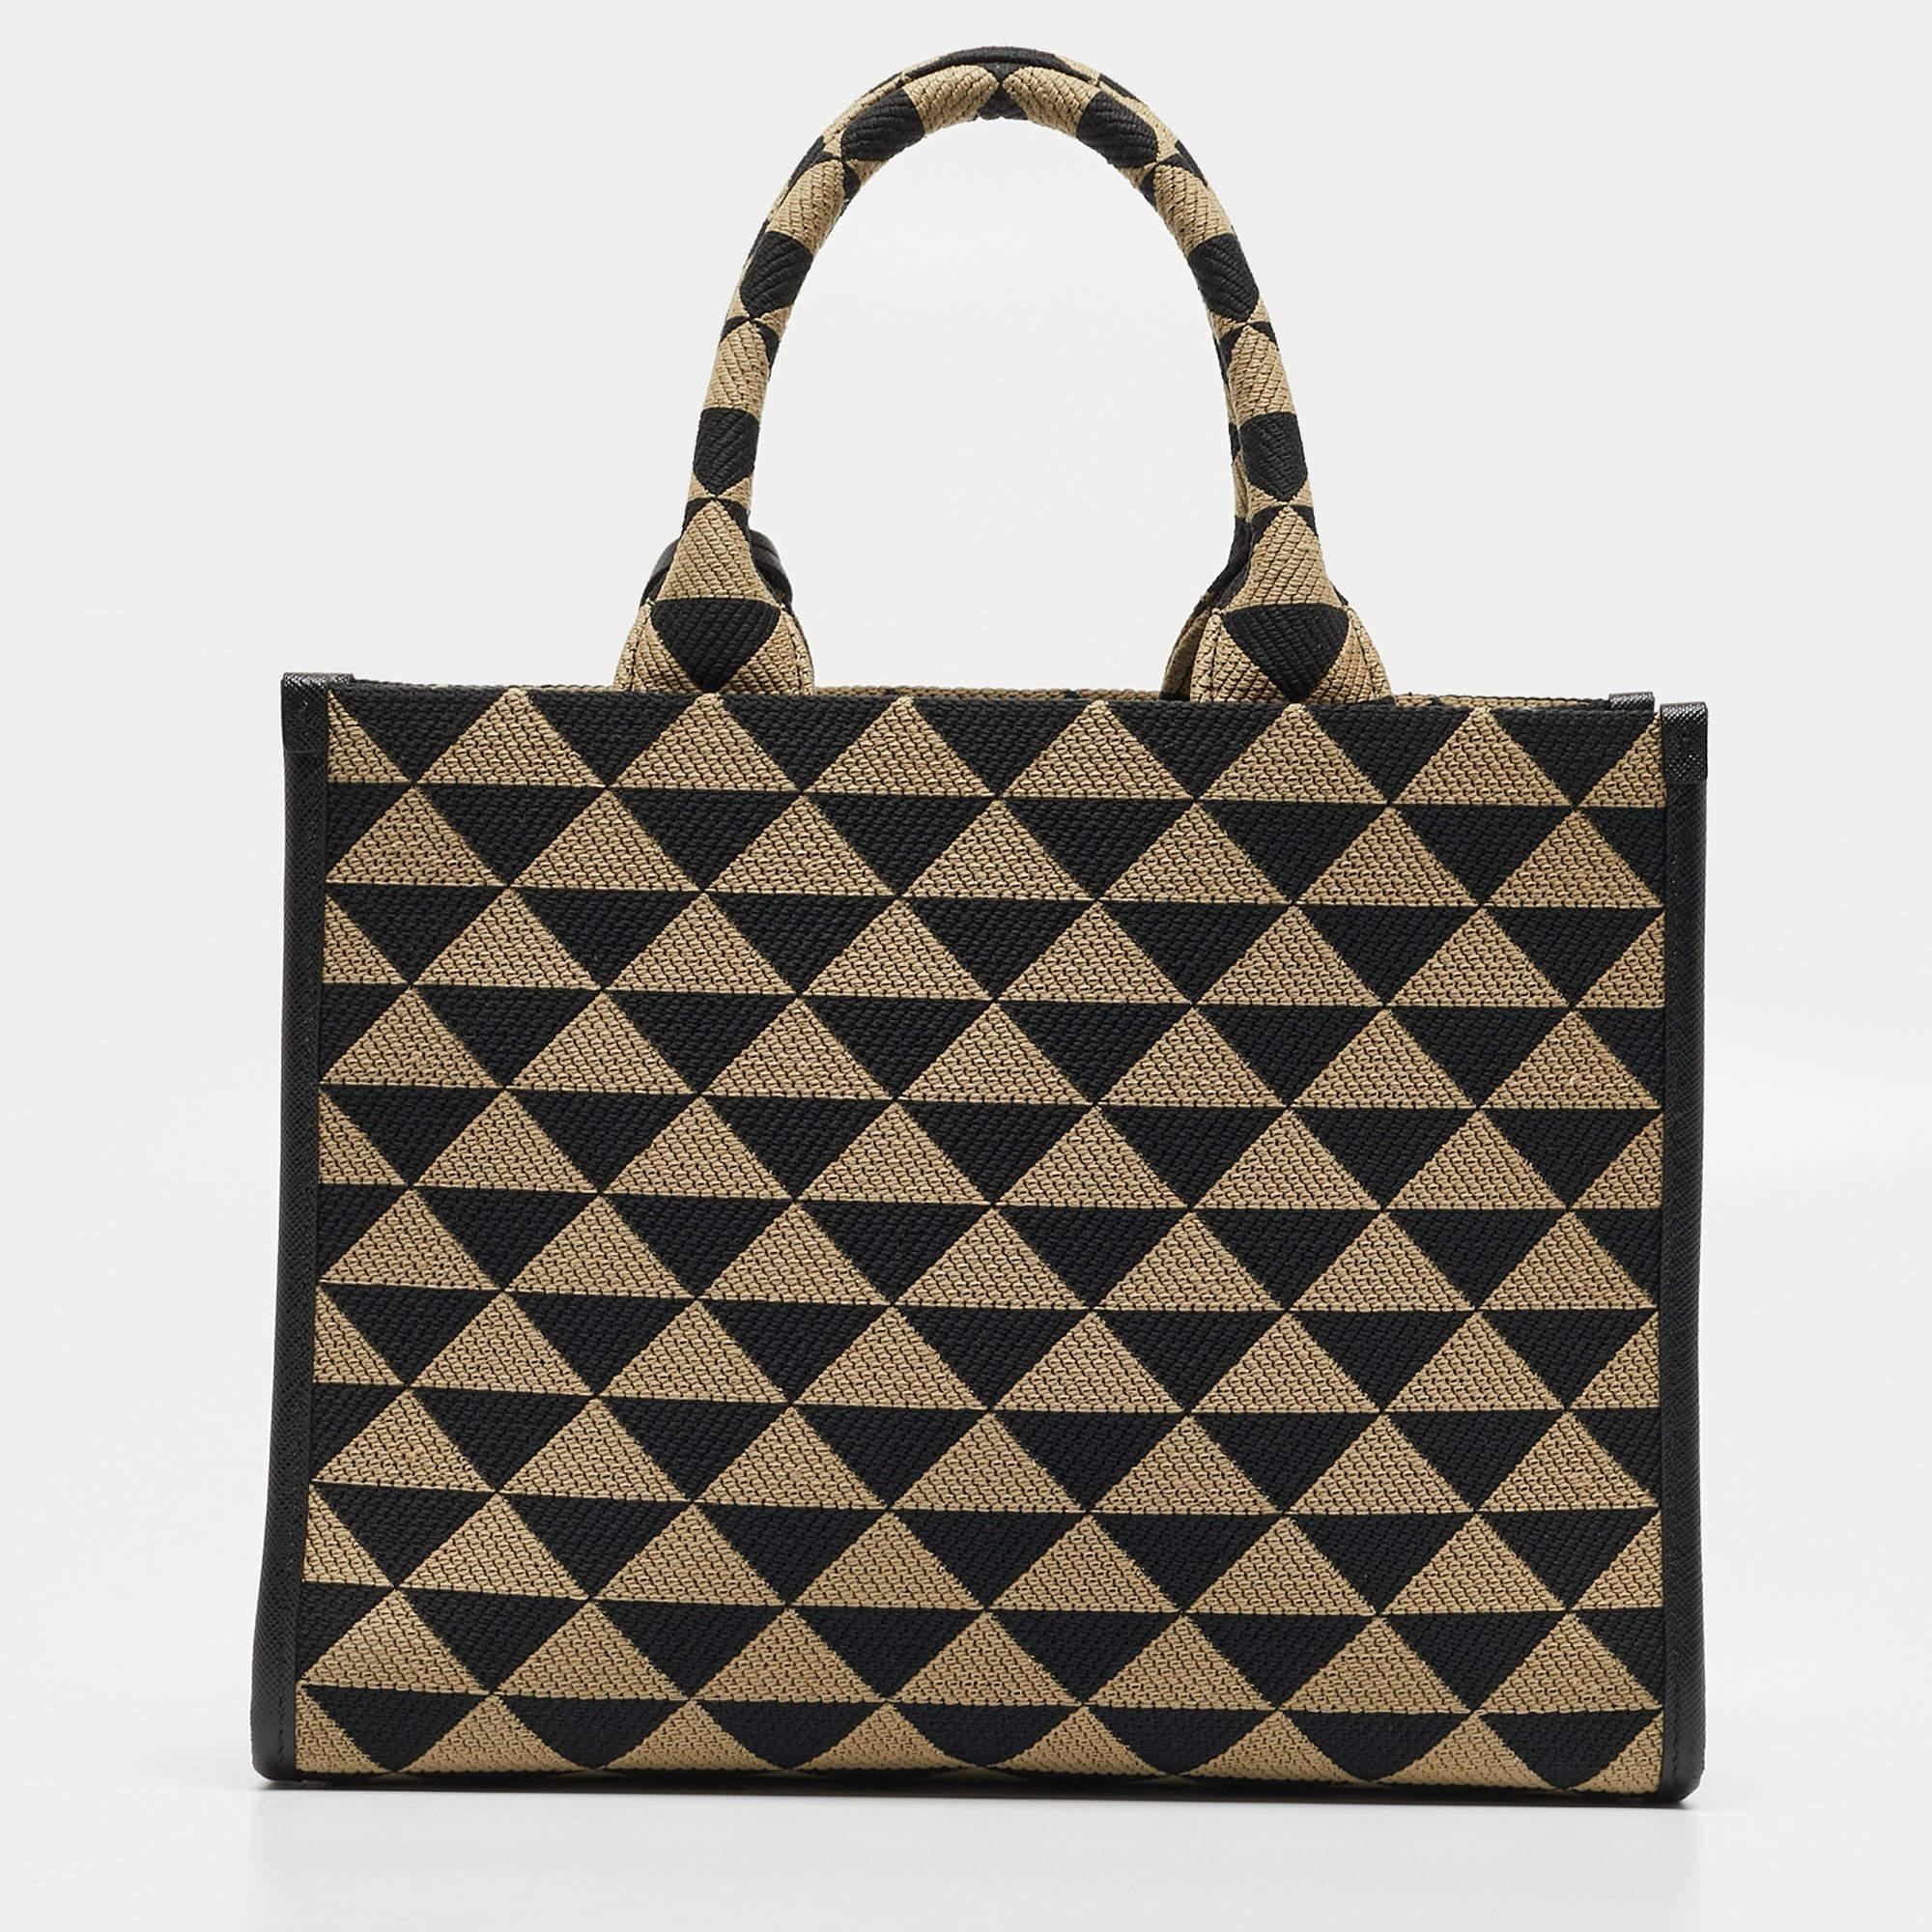 The Prada Symbole Tote is an exquisite blend of sophistication and functionality. Crafted with precision, its beige and black jacquard exterior features the iconic Symbole motifs, exuding timeless elegance. With a compact size, it seamlessly